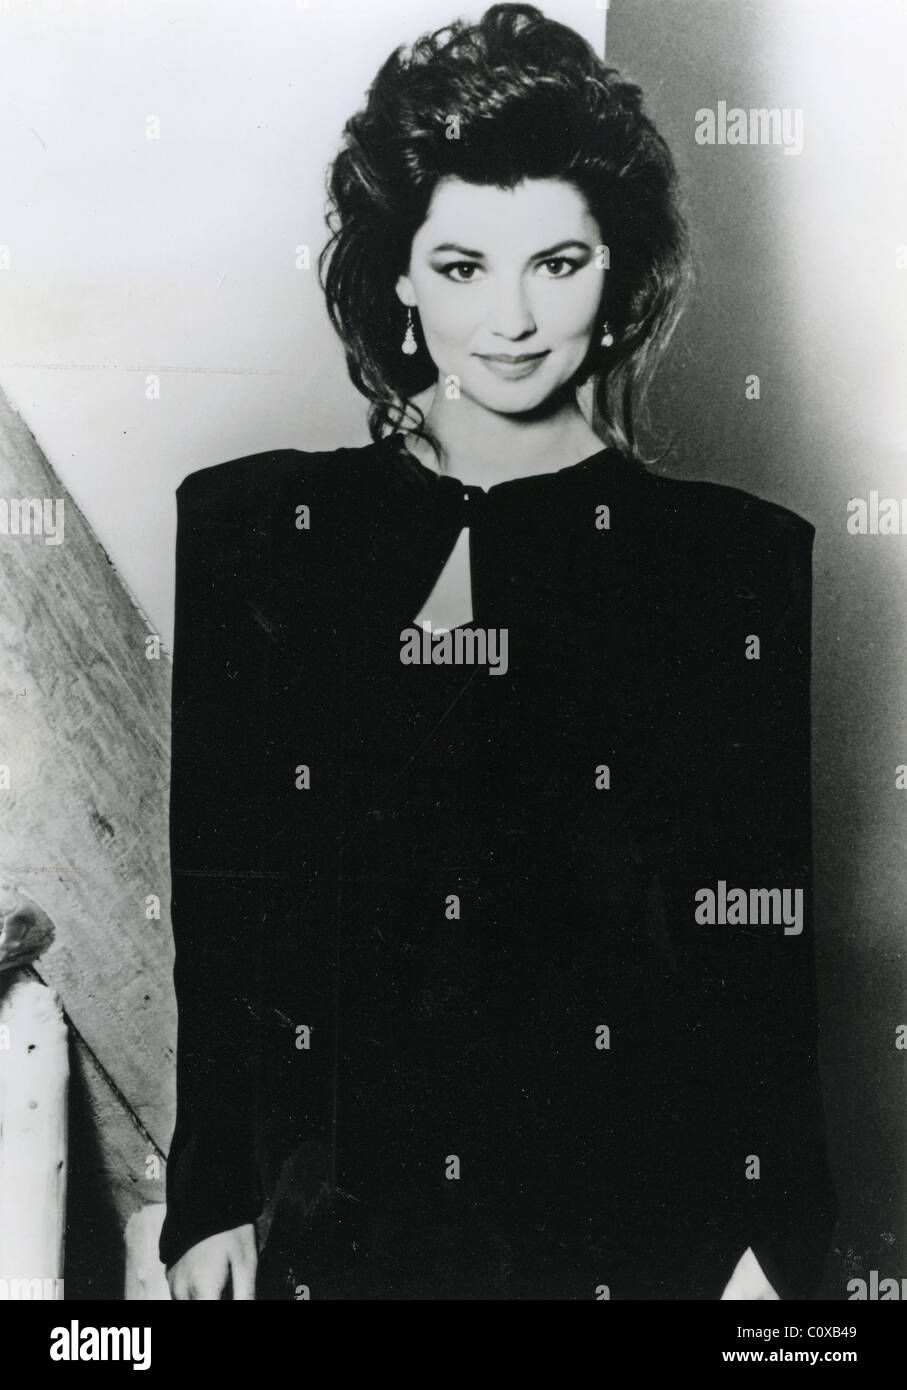 SHANIA TWAIN Promotional photo of Canadian Country  singer about 2000 Stock Photo